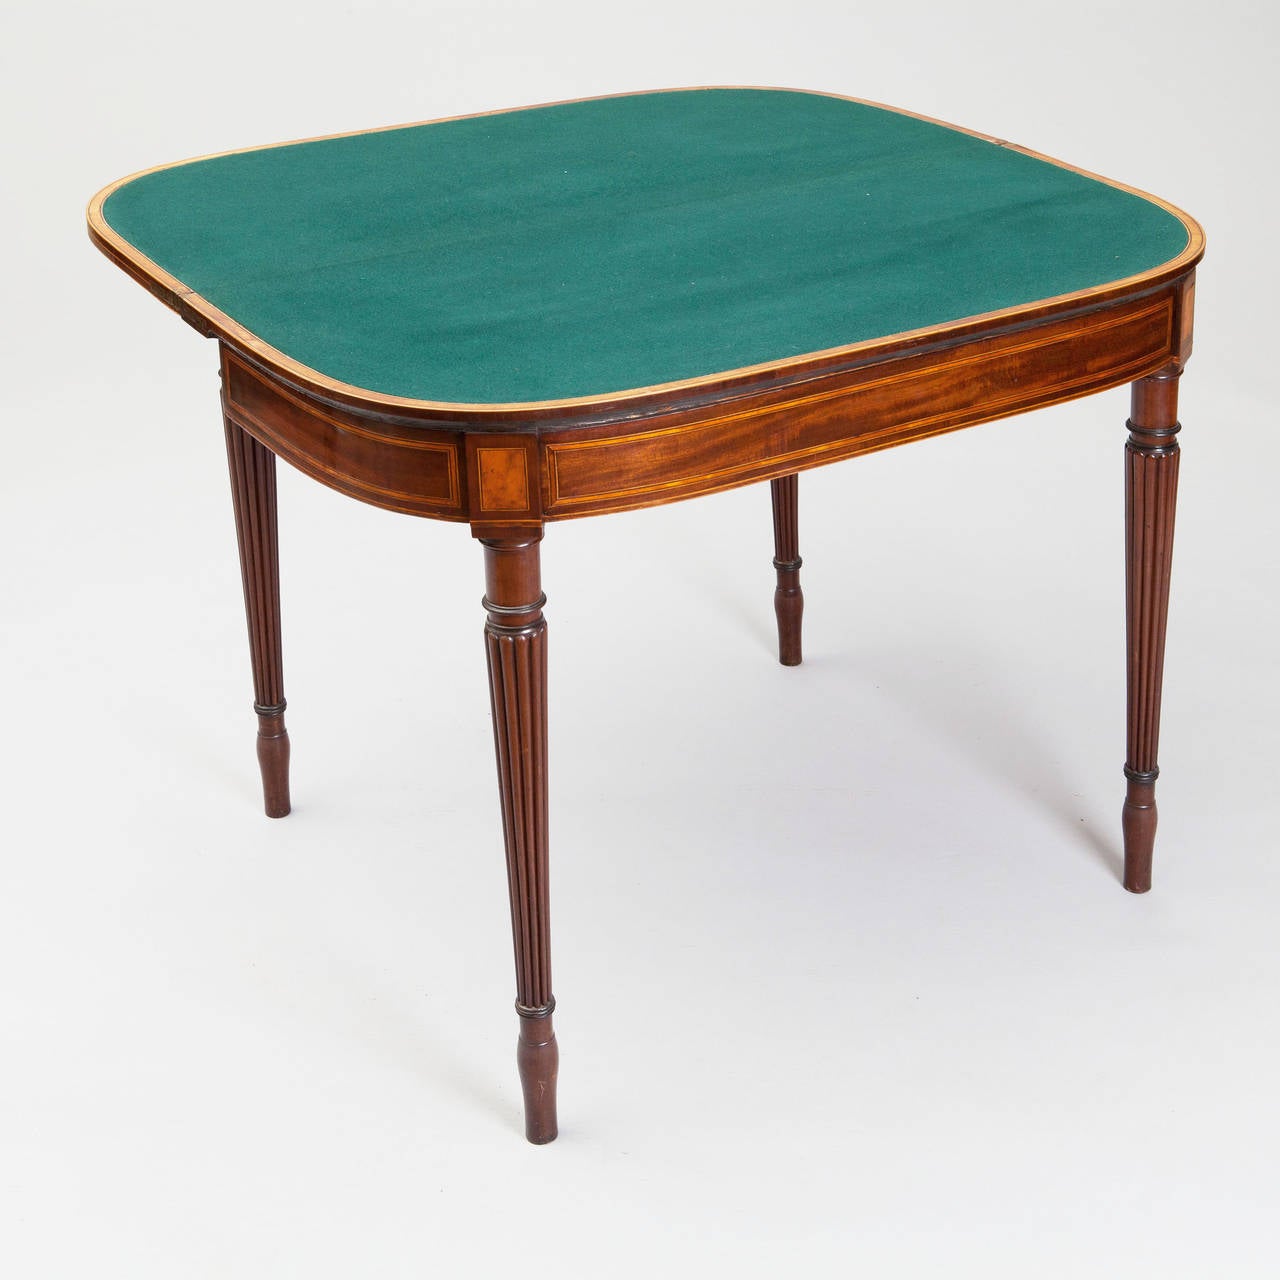 English George III Mahogany Card Tables Attributed to Gillows